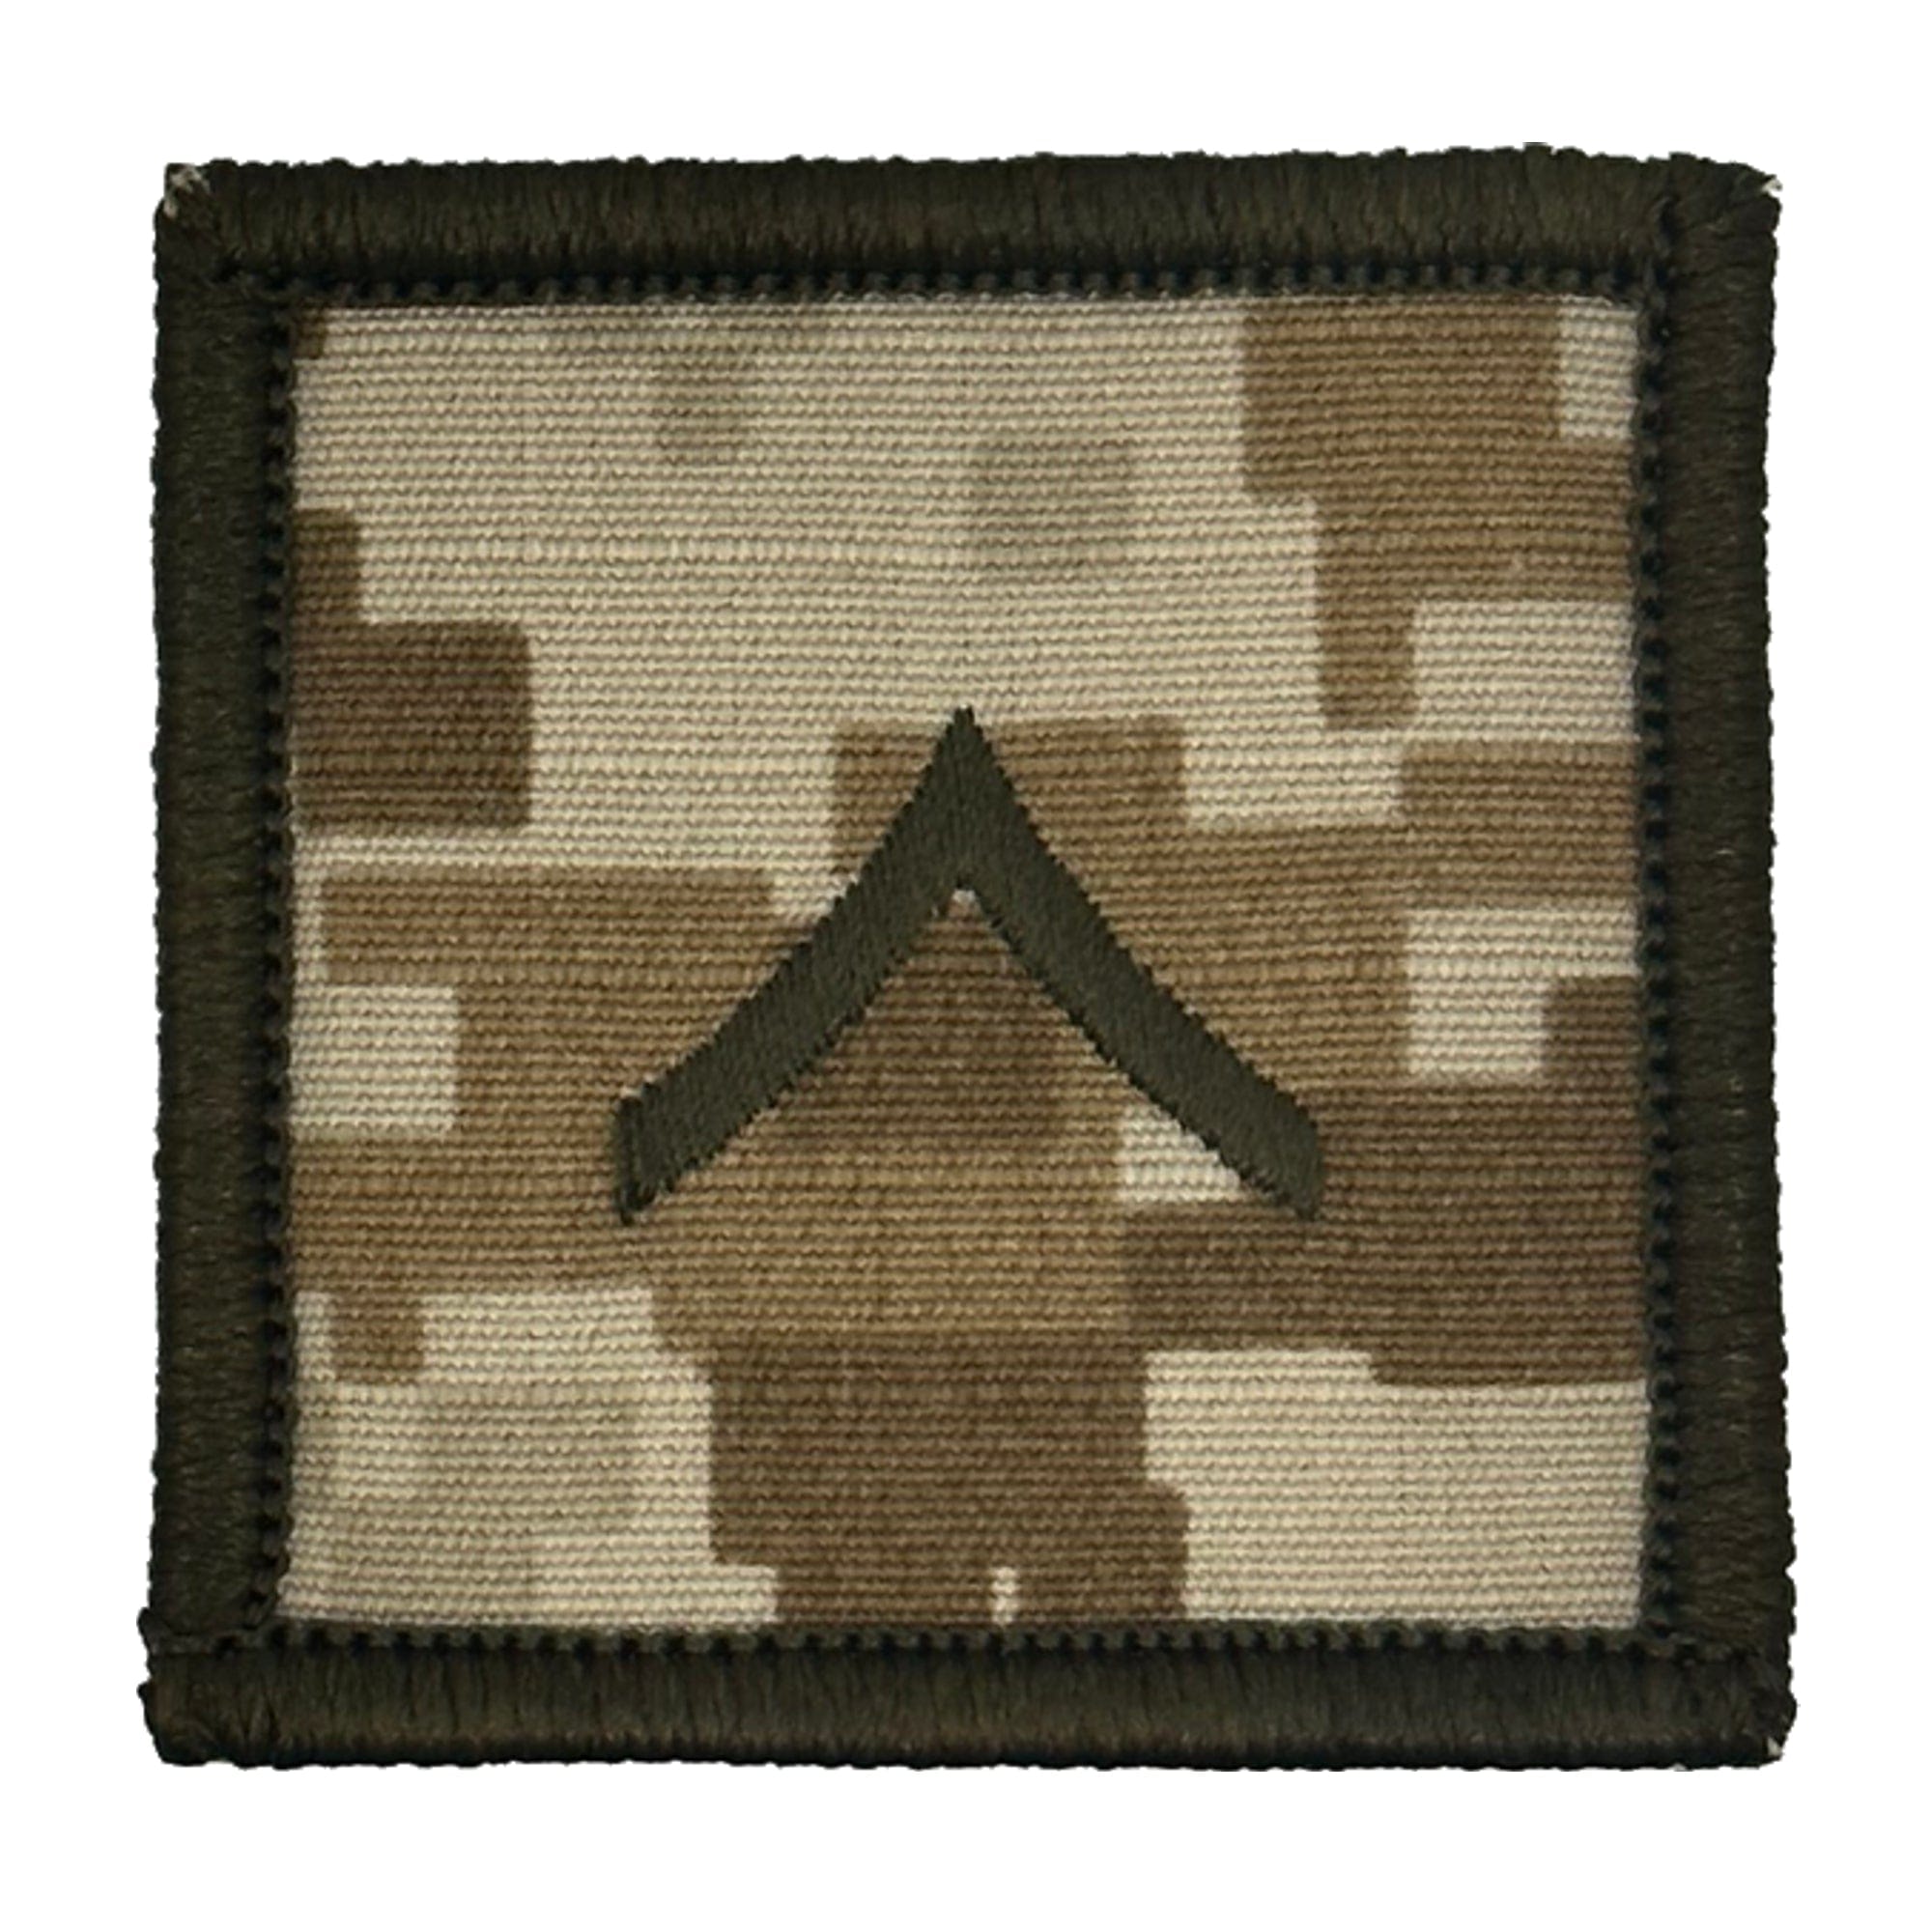 Tactical Gear Junkie Patches MARPAT Desert / Private First Class USMC Rank Insignia - 2x2 Patch